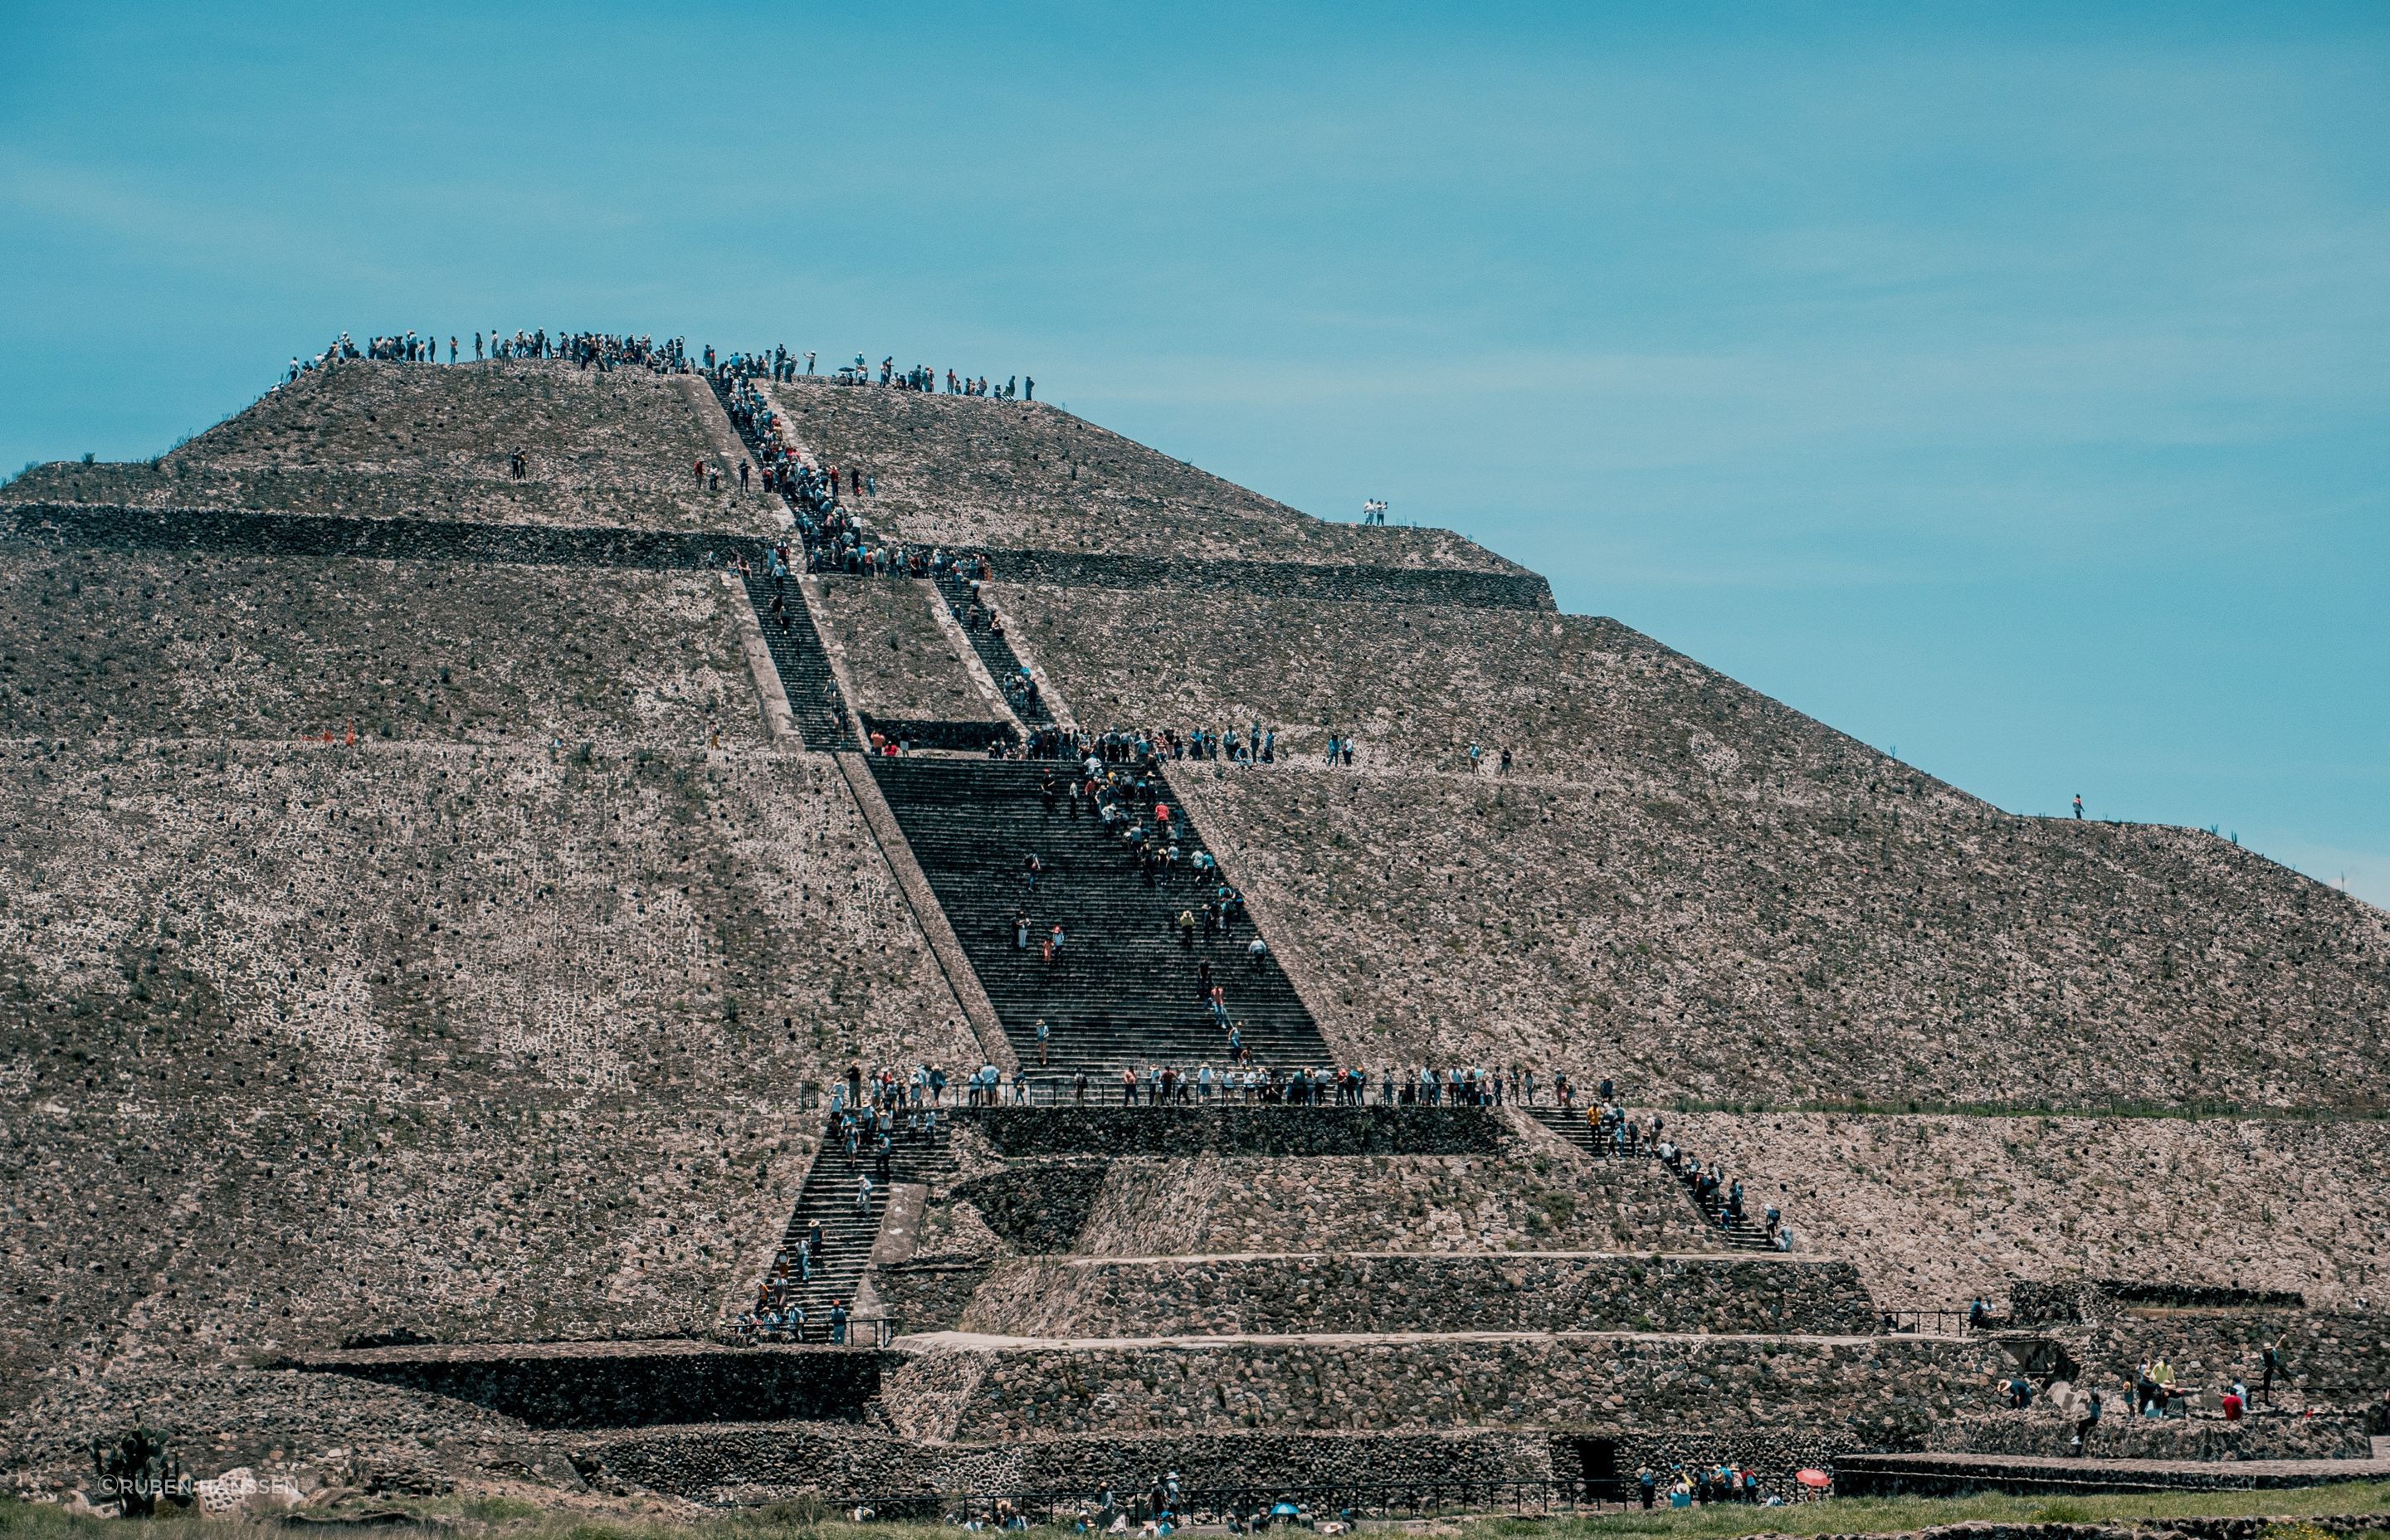 The Pyramid of the Sun in Mexico was built with Adobe bricks